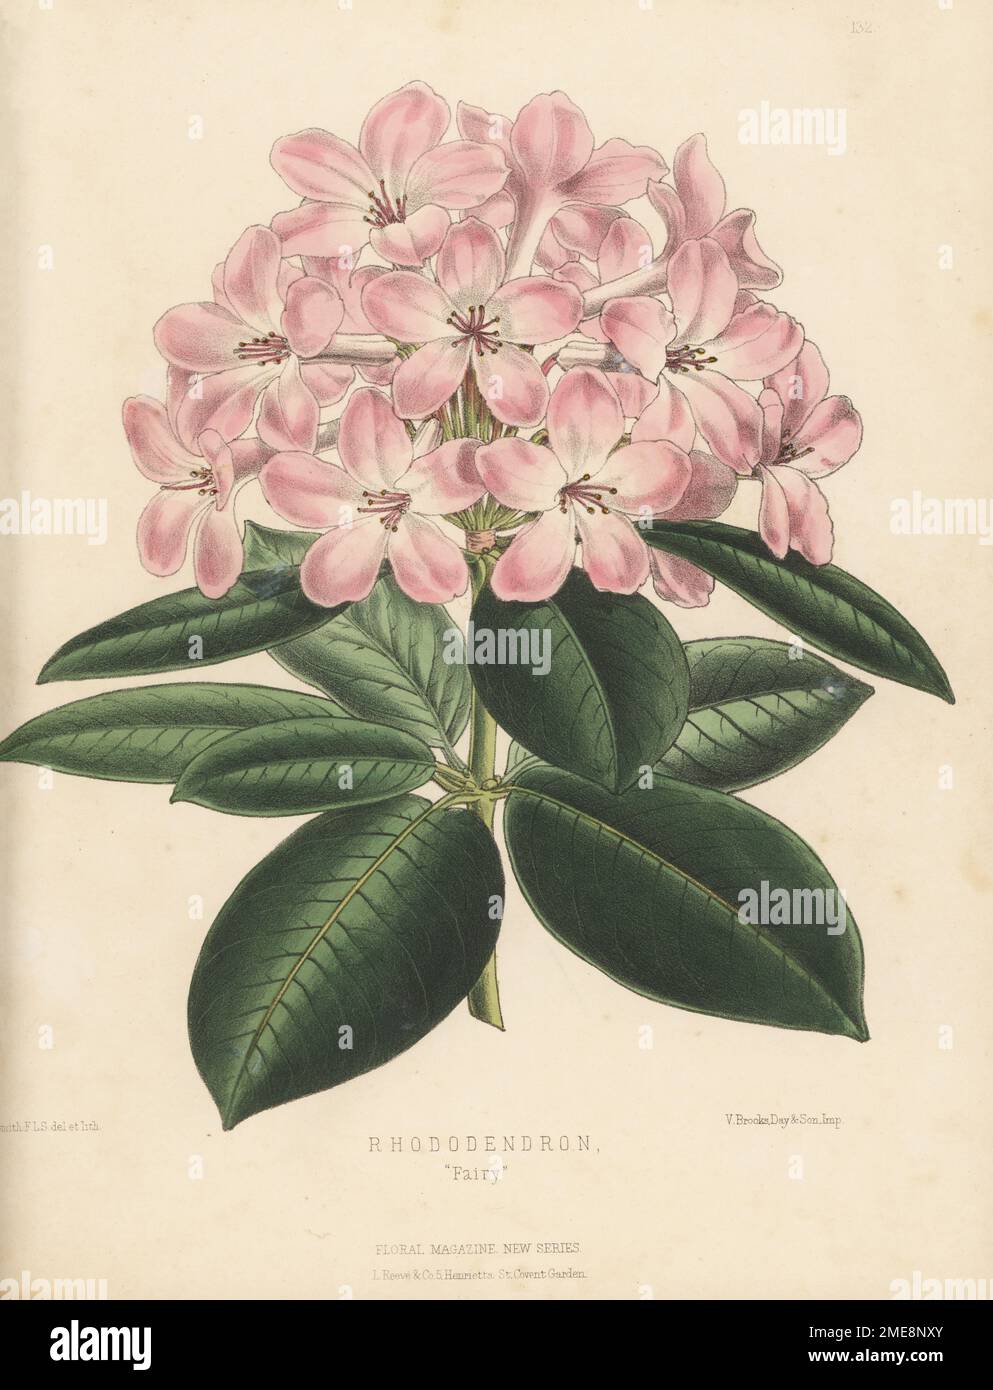 Rhododendron cultivar, Fairy. Pink-flowered hybrd raised by William Bull Nursery, King's Road, Chelsea. Handcolored botanical illustration drawn and lithographed by Worthington George Smith from Henry Honywood Dombrain's Floral Magazine, New Series, Volume 3, L. Reeve, London, 1874. Lithograph printed by Vincent Brooks, Day & Son. Stock Photo